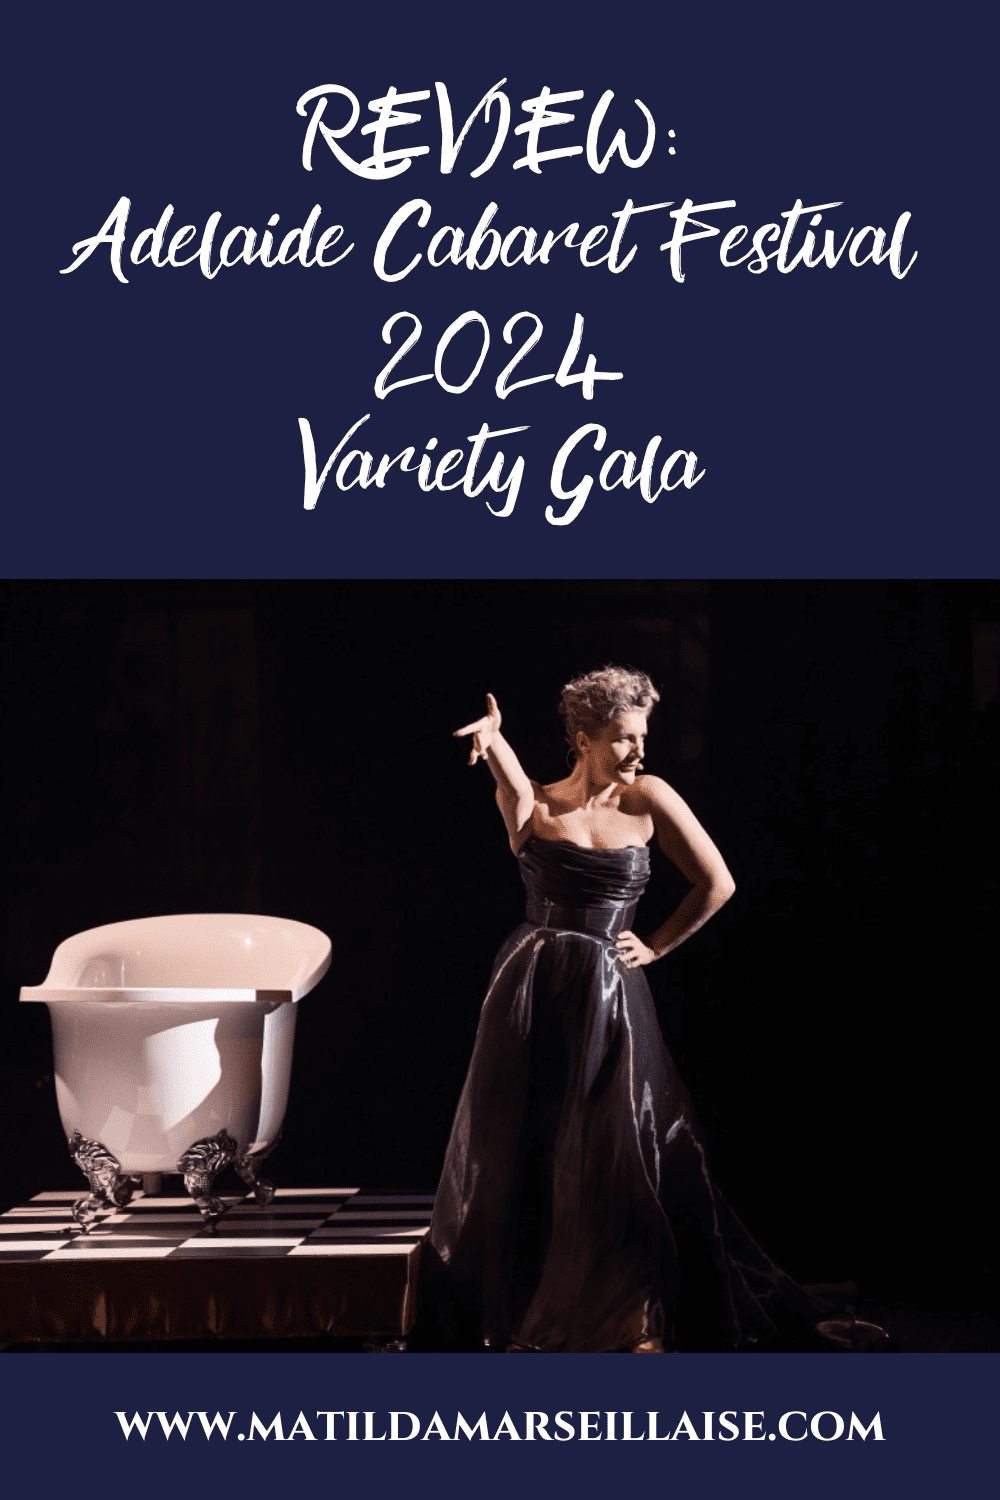 Adelaide Cabaret Festival 2024 Variety Gala leaves audiences keen for more as an icon is crowned